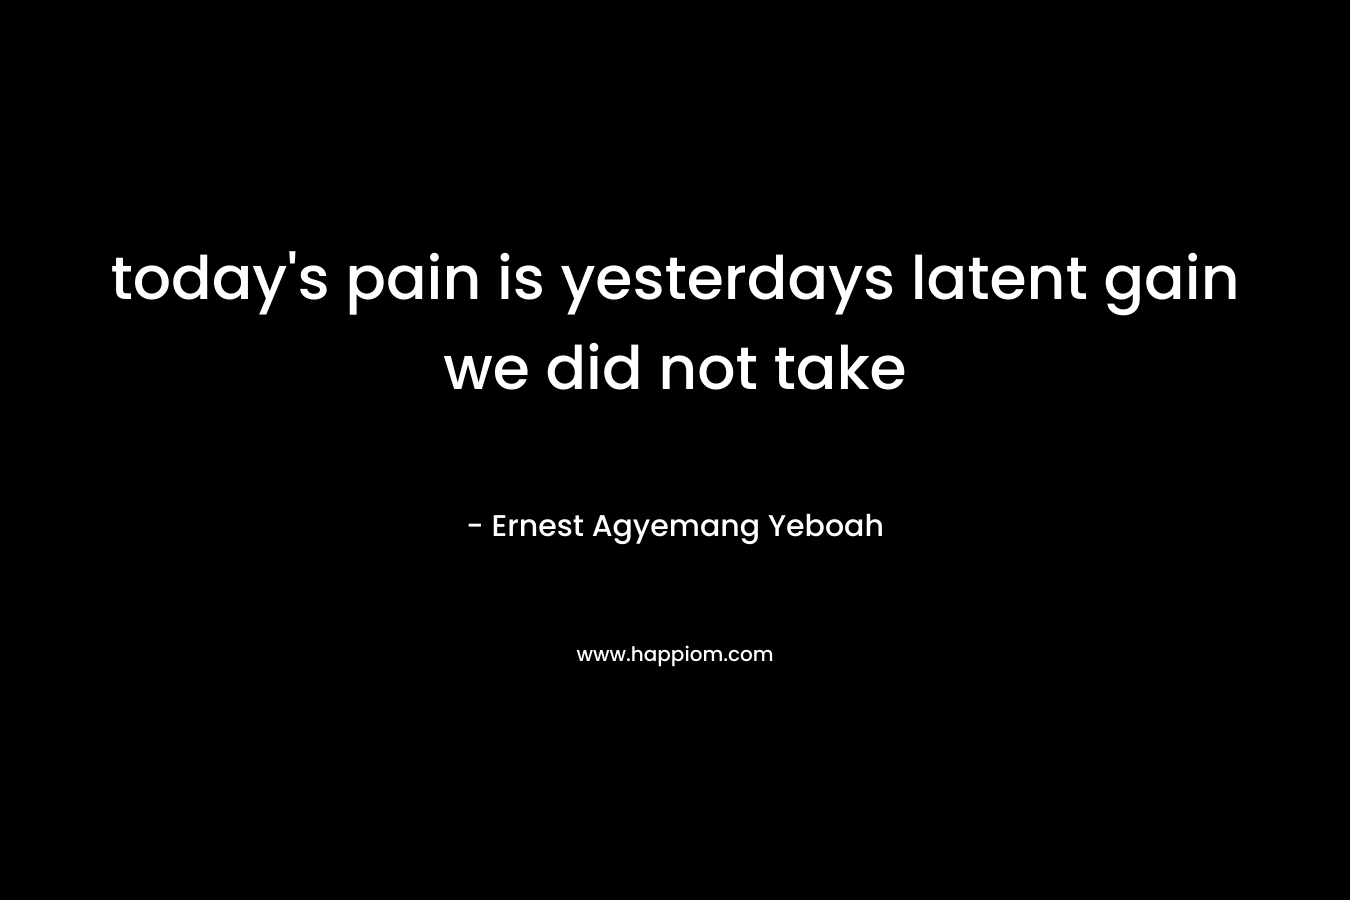 today’s pain is yesterdays latent gain we did not take – Ernest Agyemang Yeboah